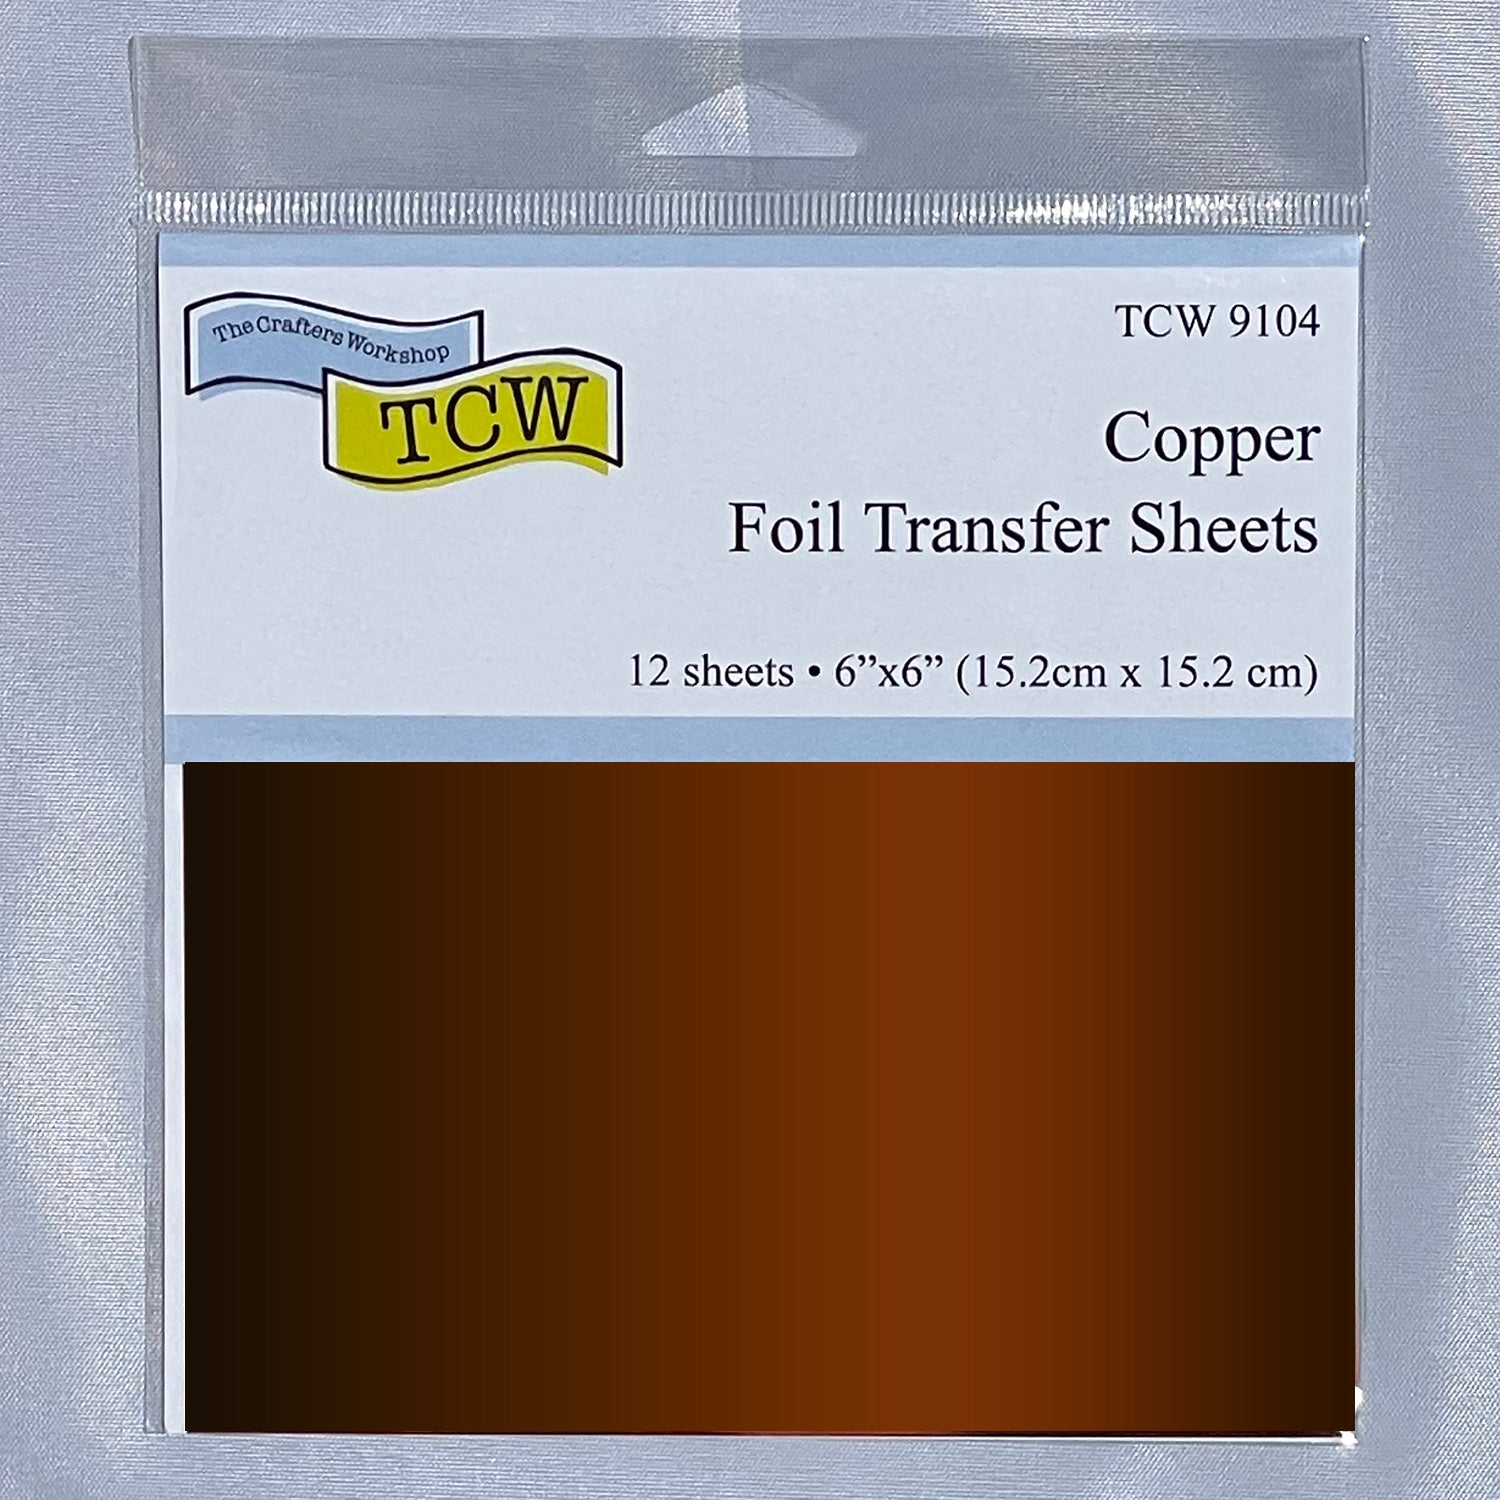 The Crafter's Workshop Foil Transfer Sheets - 6 x 6